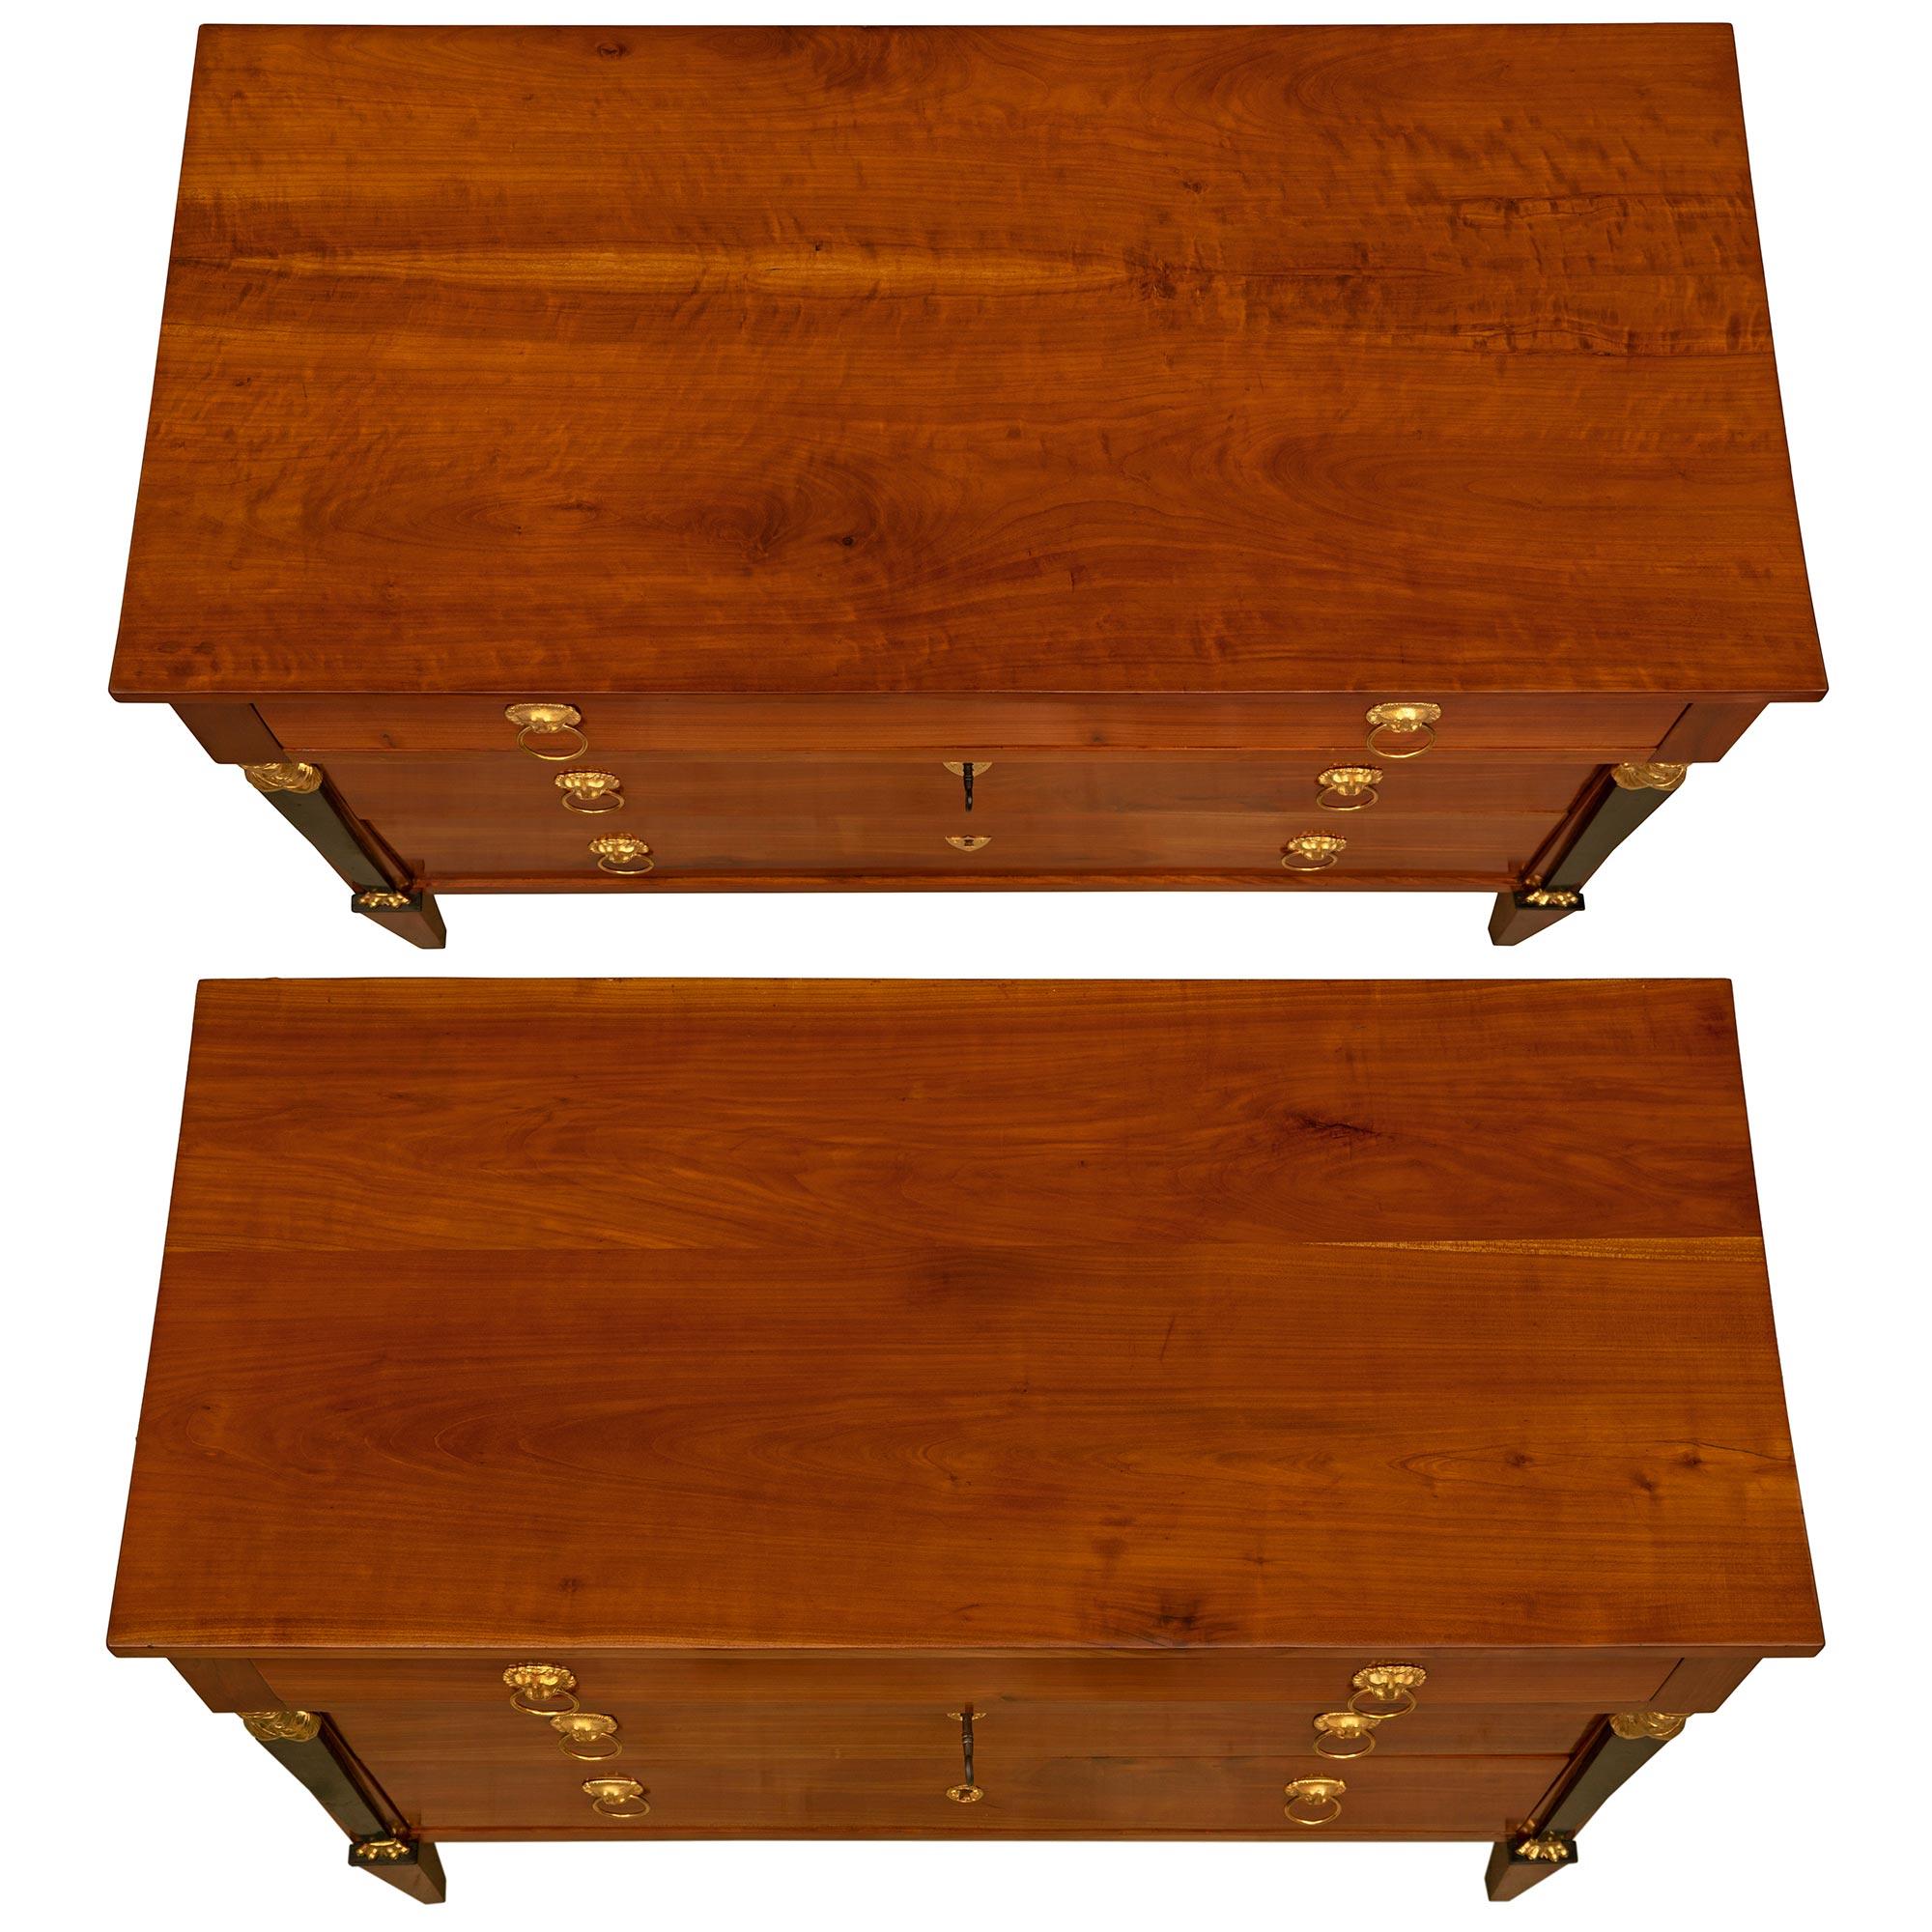 A striking pair of Italian 19th century Empire st. Cherrywood, ebonized Fruitwood and ormolu commodes. Each three drawer chest is raised by elegant square tapered legs below remarkable ebonized fruitwood tapered columns with richly chased ormolu